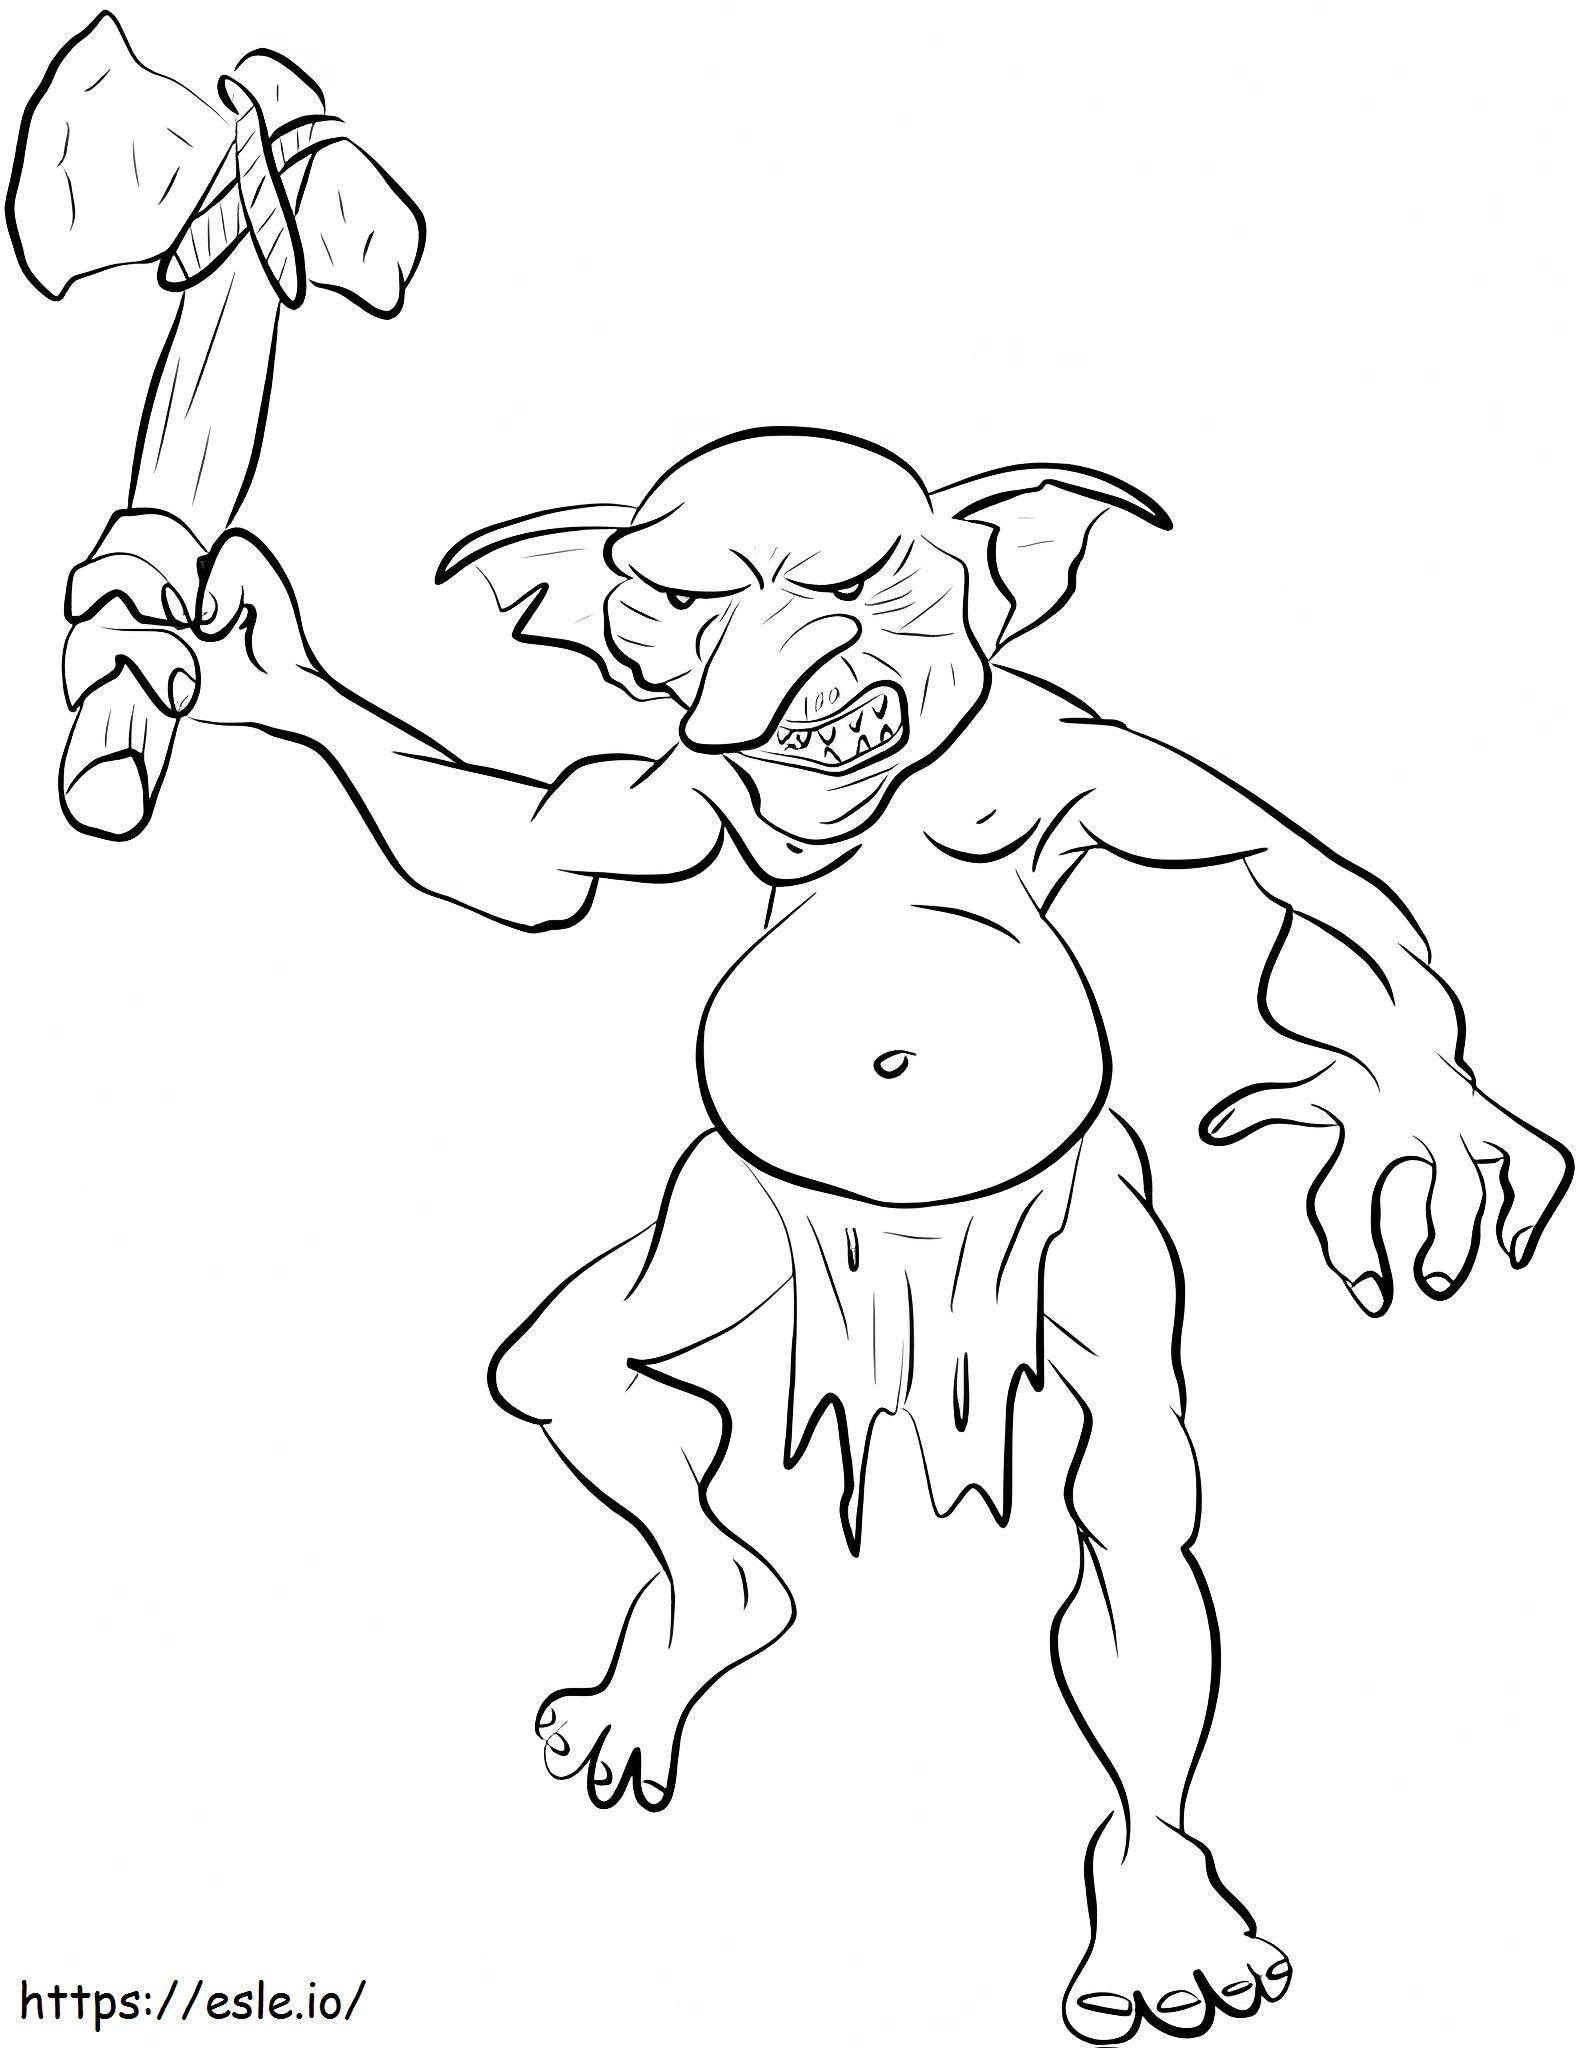 Angry Goblin coloring page